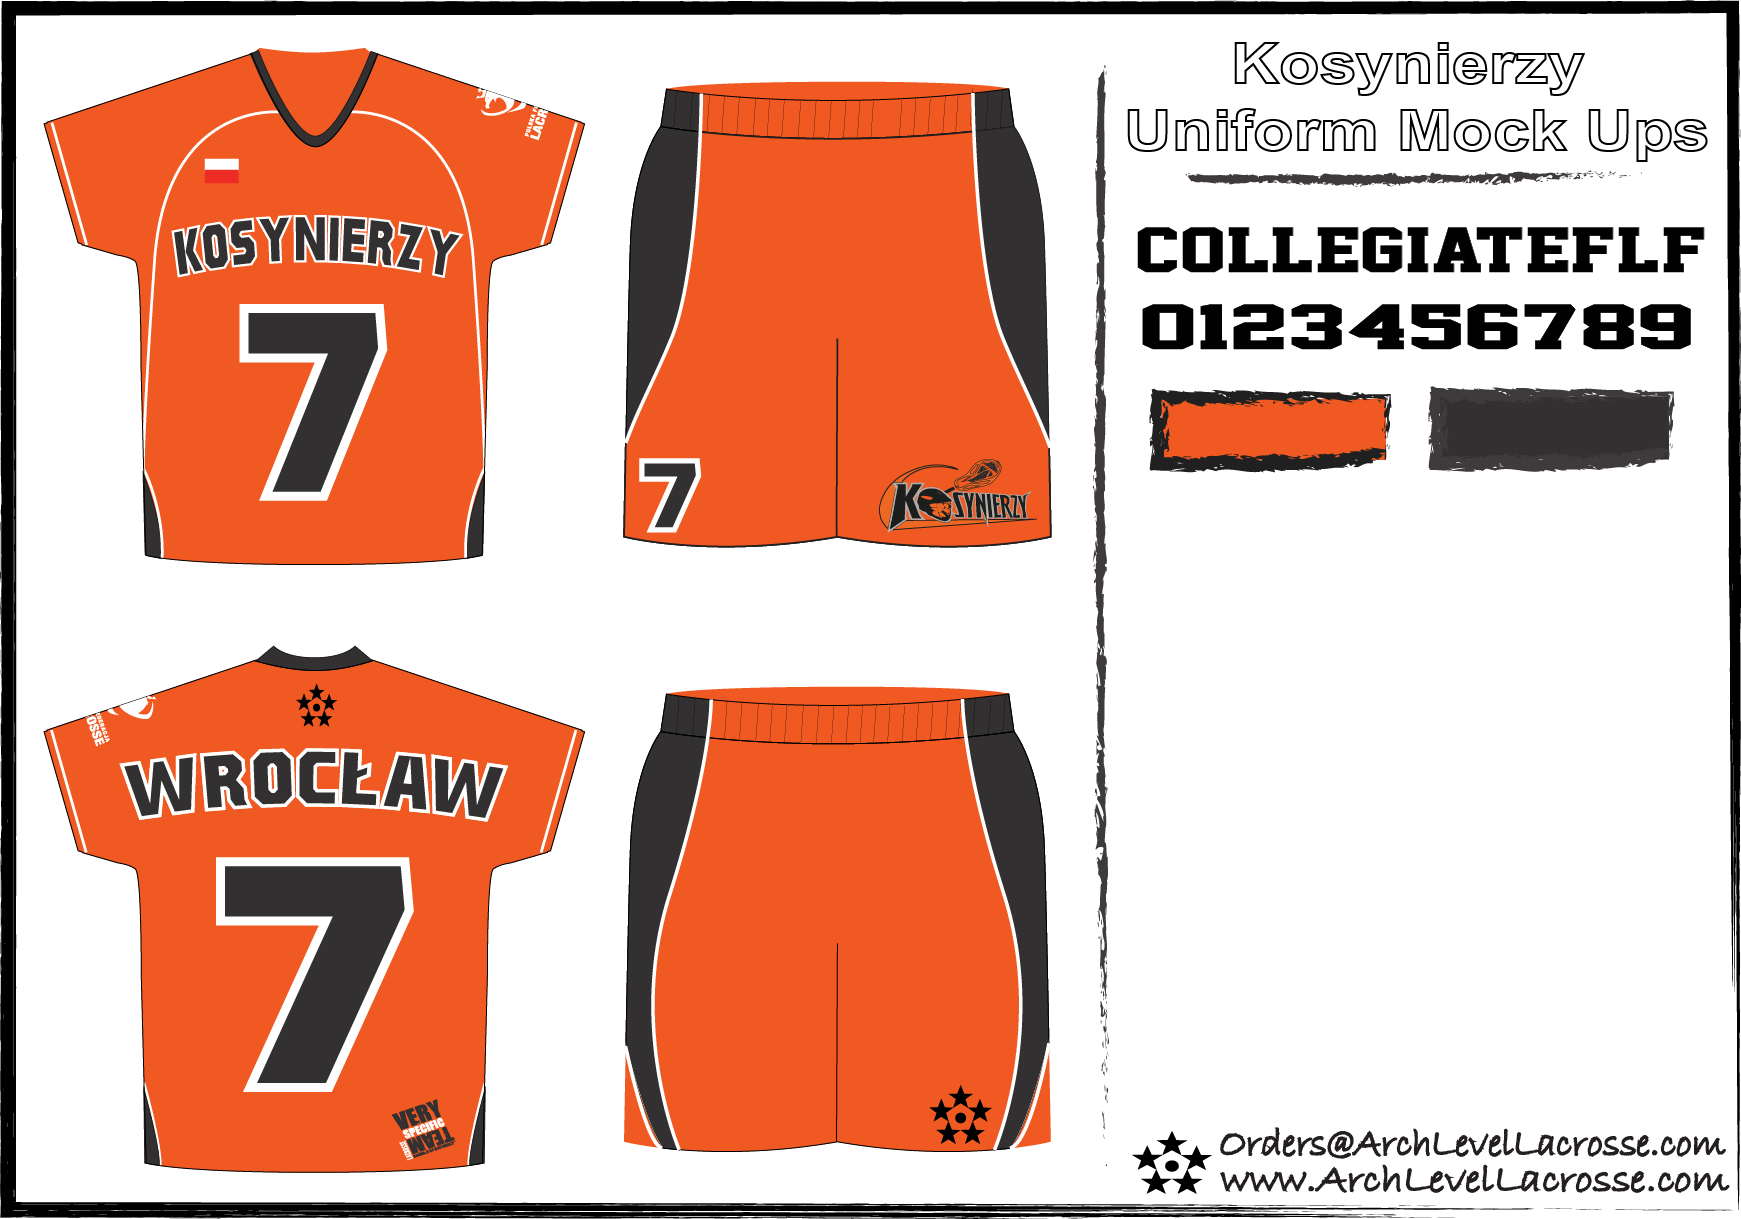 ArchLevel Lacrosse Wroclaw design